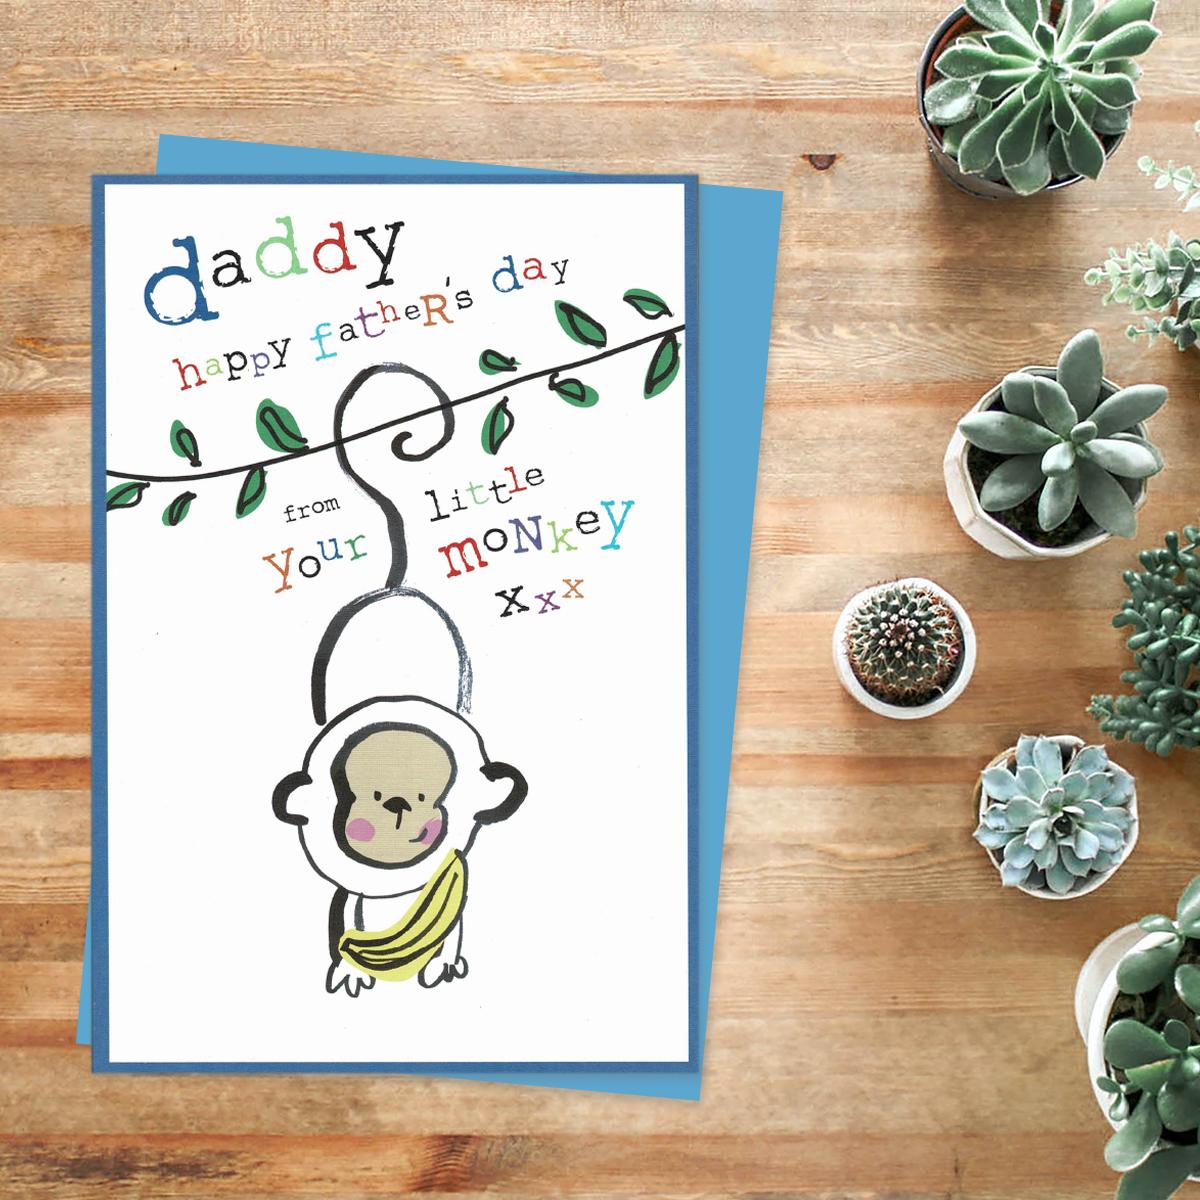 ' Daddy Happy Father's Day From Your Little Monkey' Card  Featuring A Cartoon Monkey Hanging From A Branch! Complete With Blue Envelope